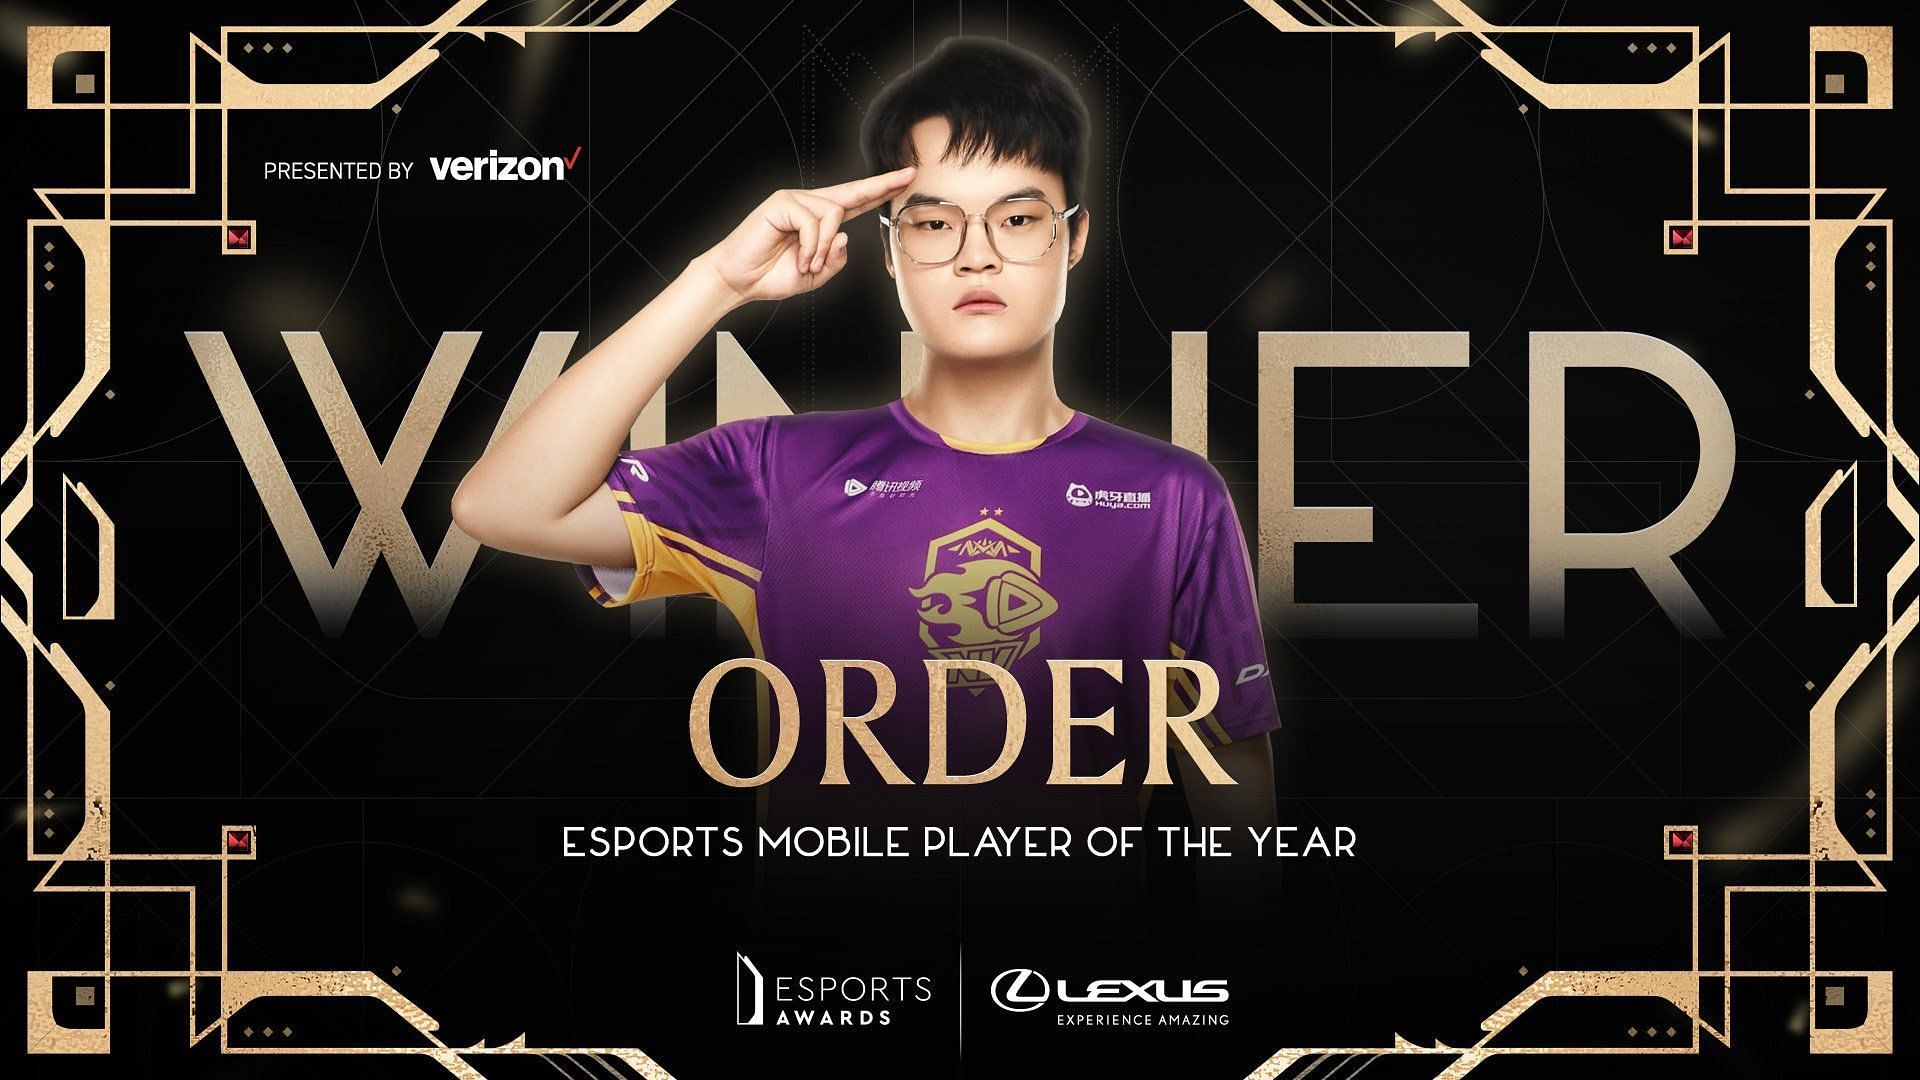 PUBG Mobile star Order wins Esports Mobile Player of the Year at